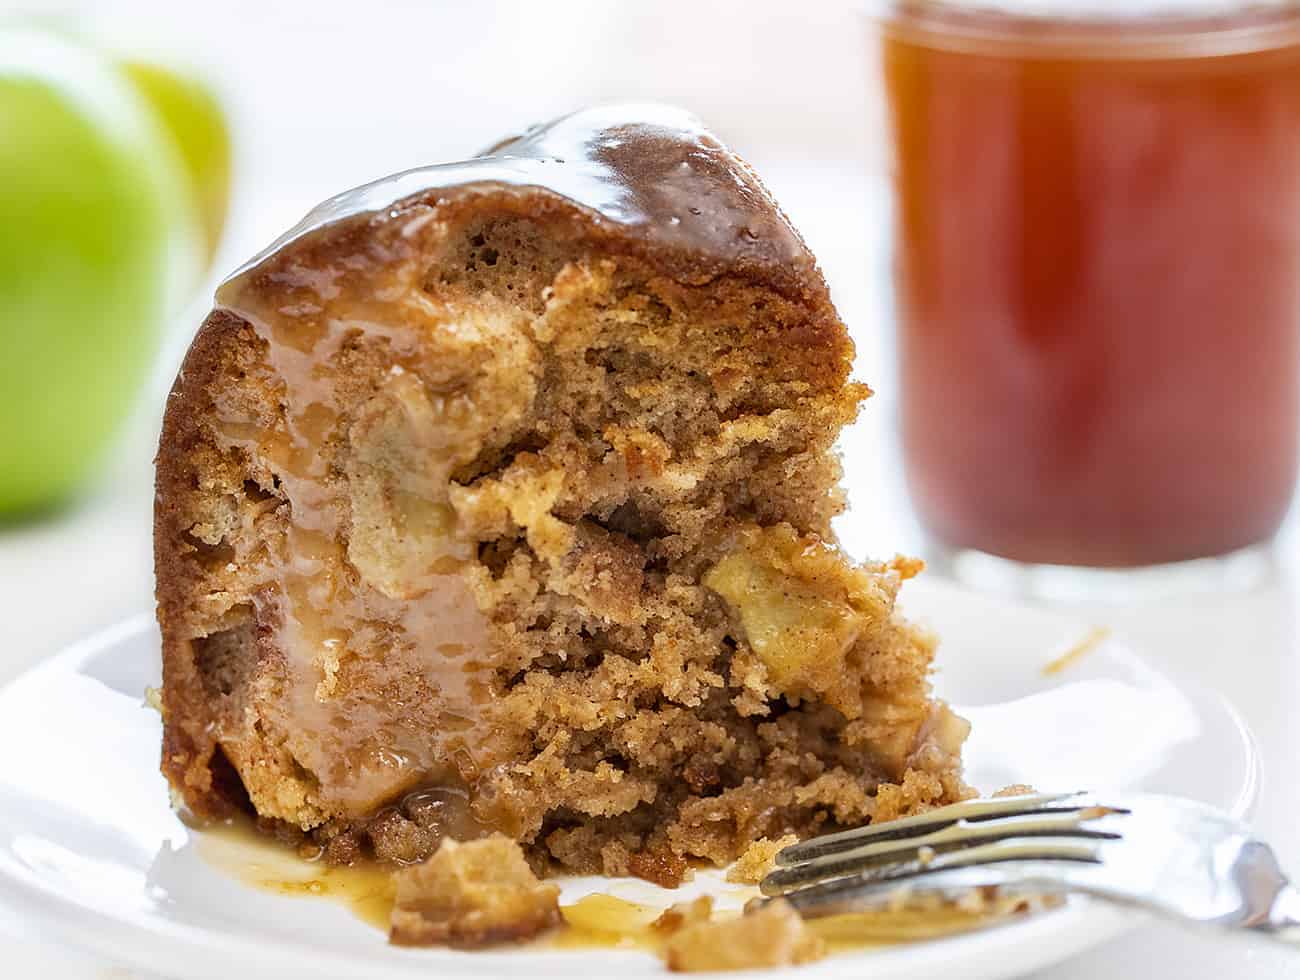 Piece of Cinnamon Apple Moonshine Cake with Bite Taken Out